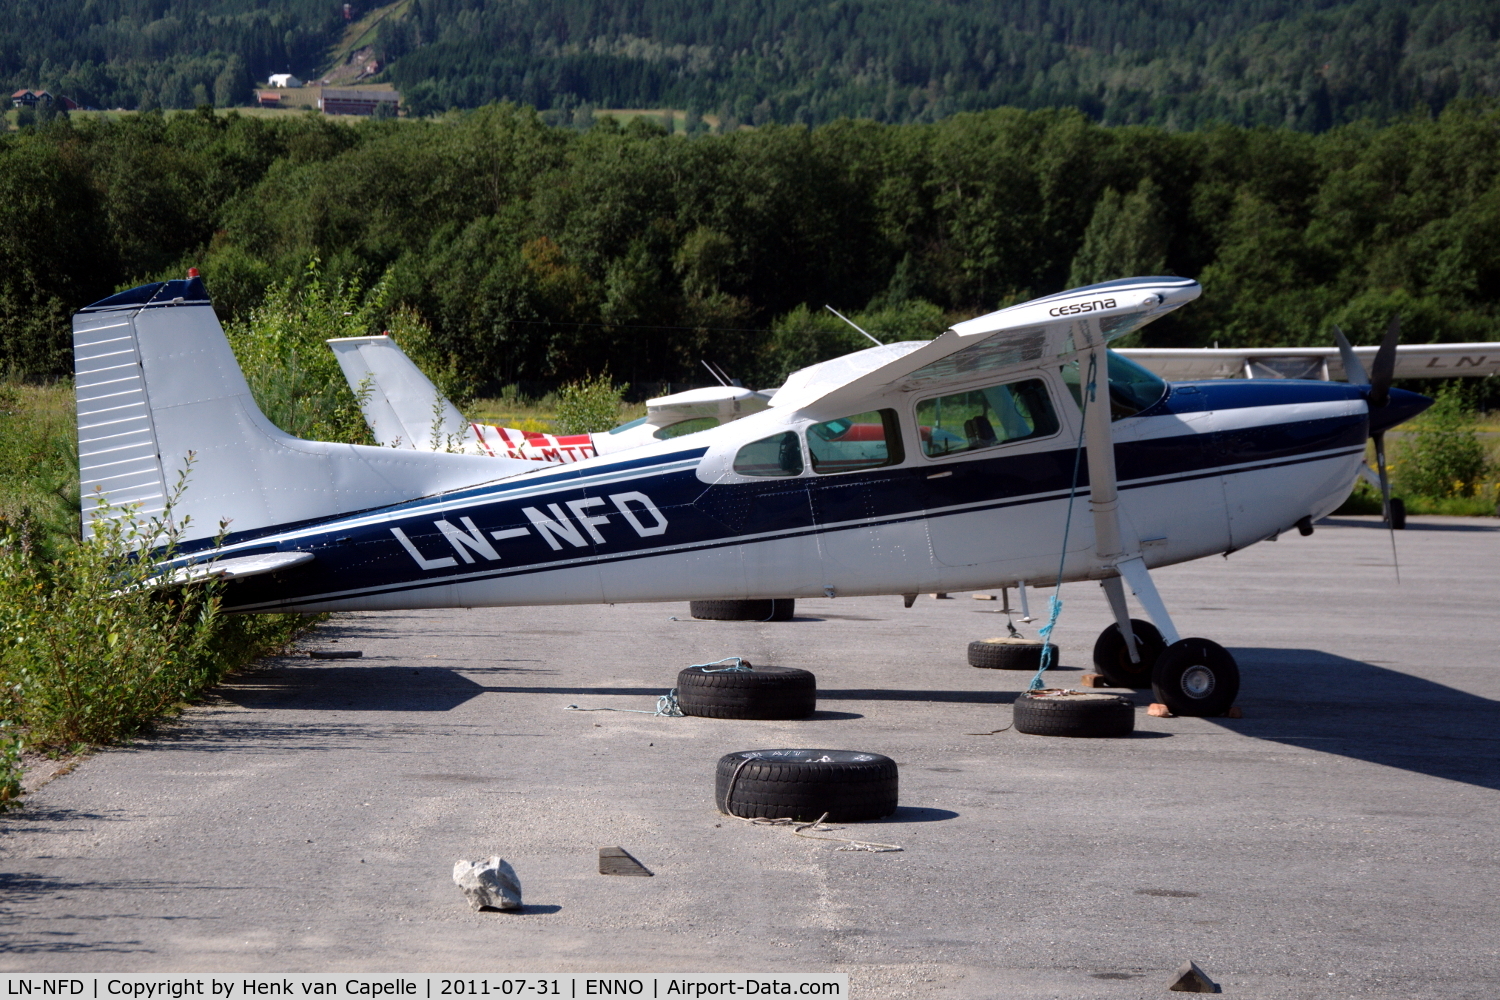 LN-NFD, Cessna A185F Skywagon 185 C/N 185-04152, Cessna A185F parked at Notodden airfield, Norway